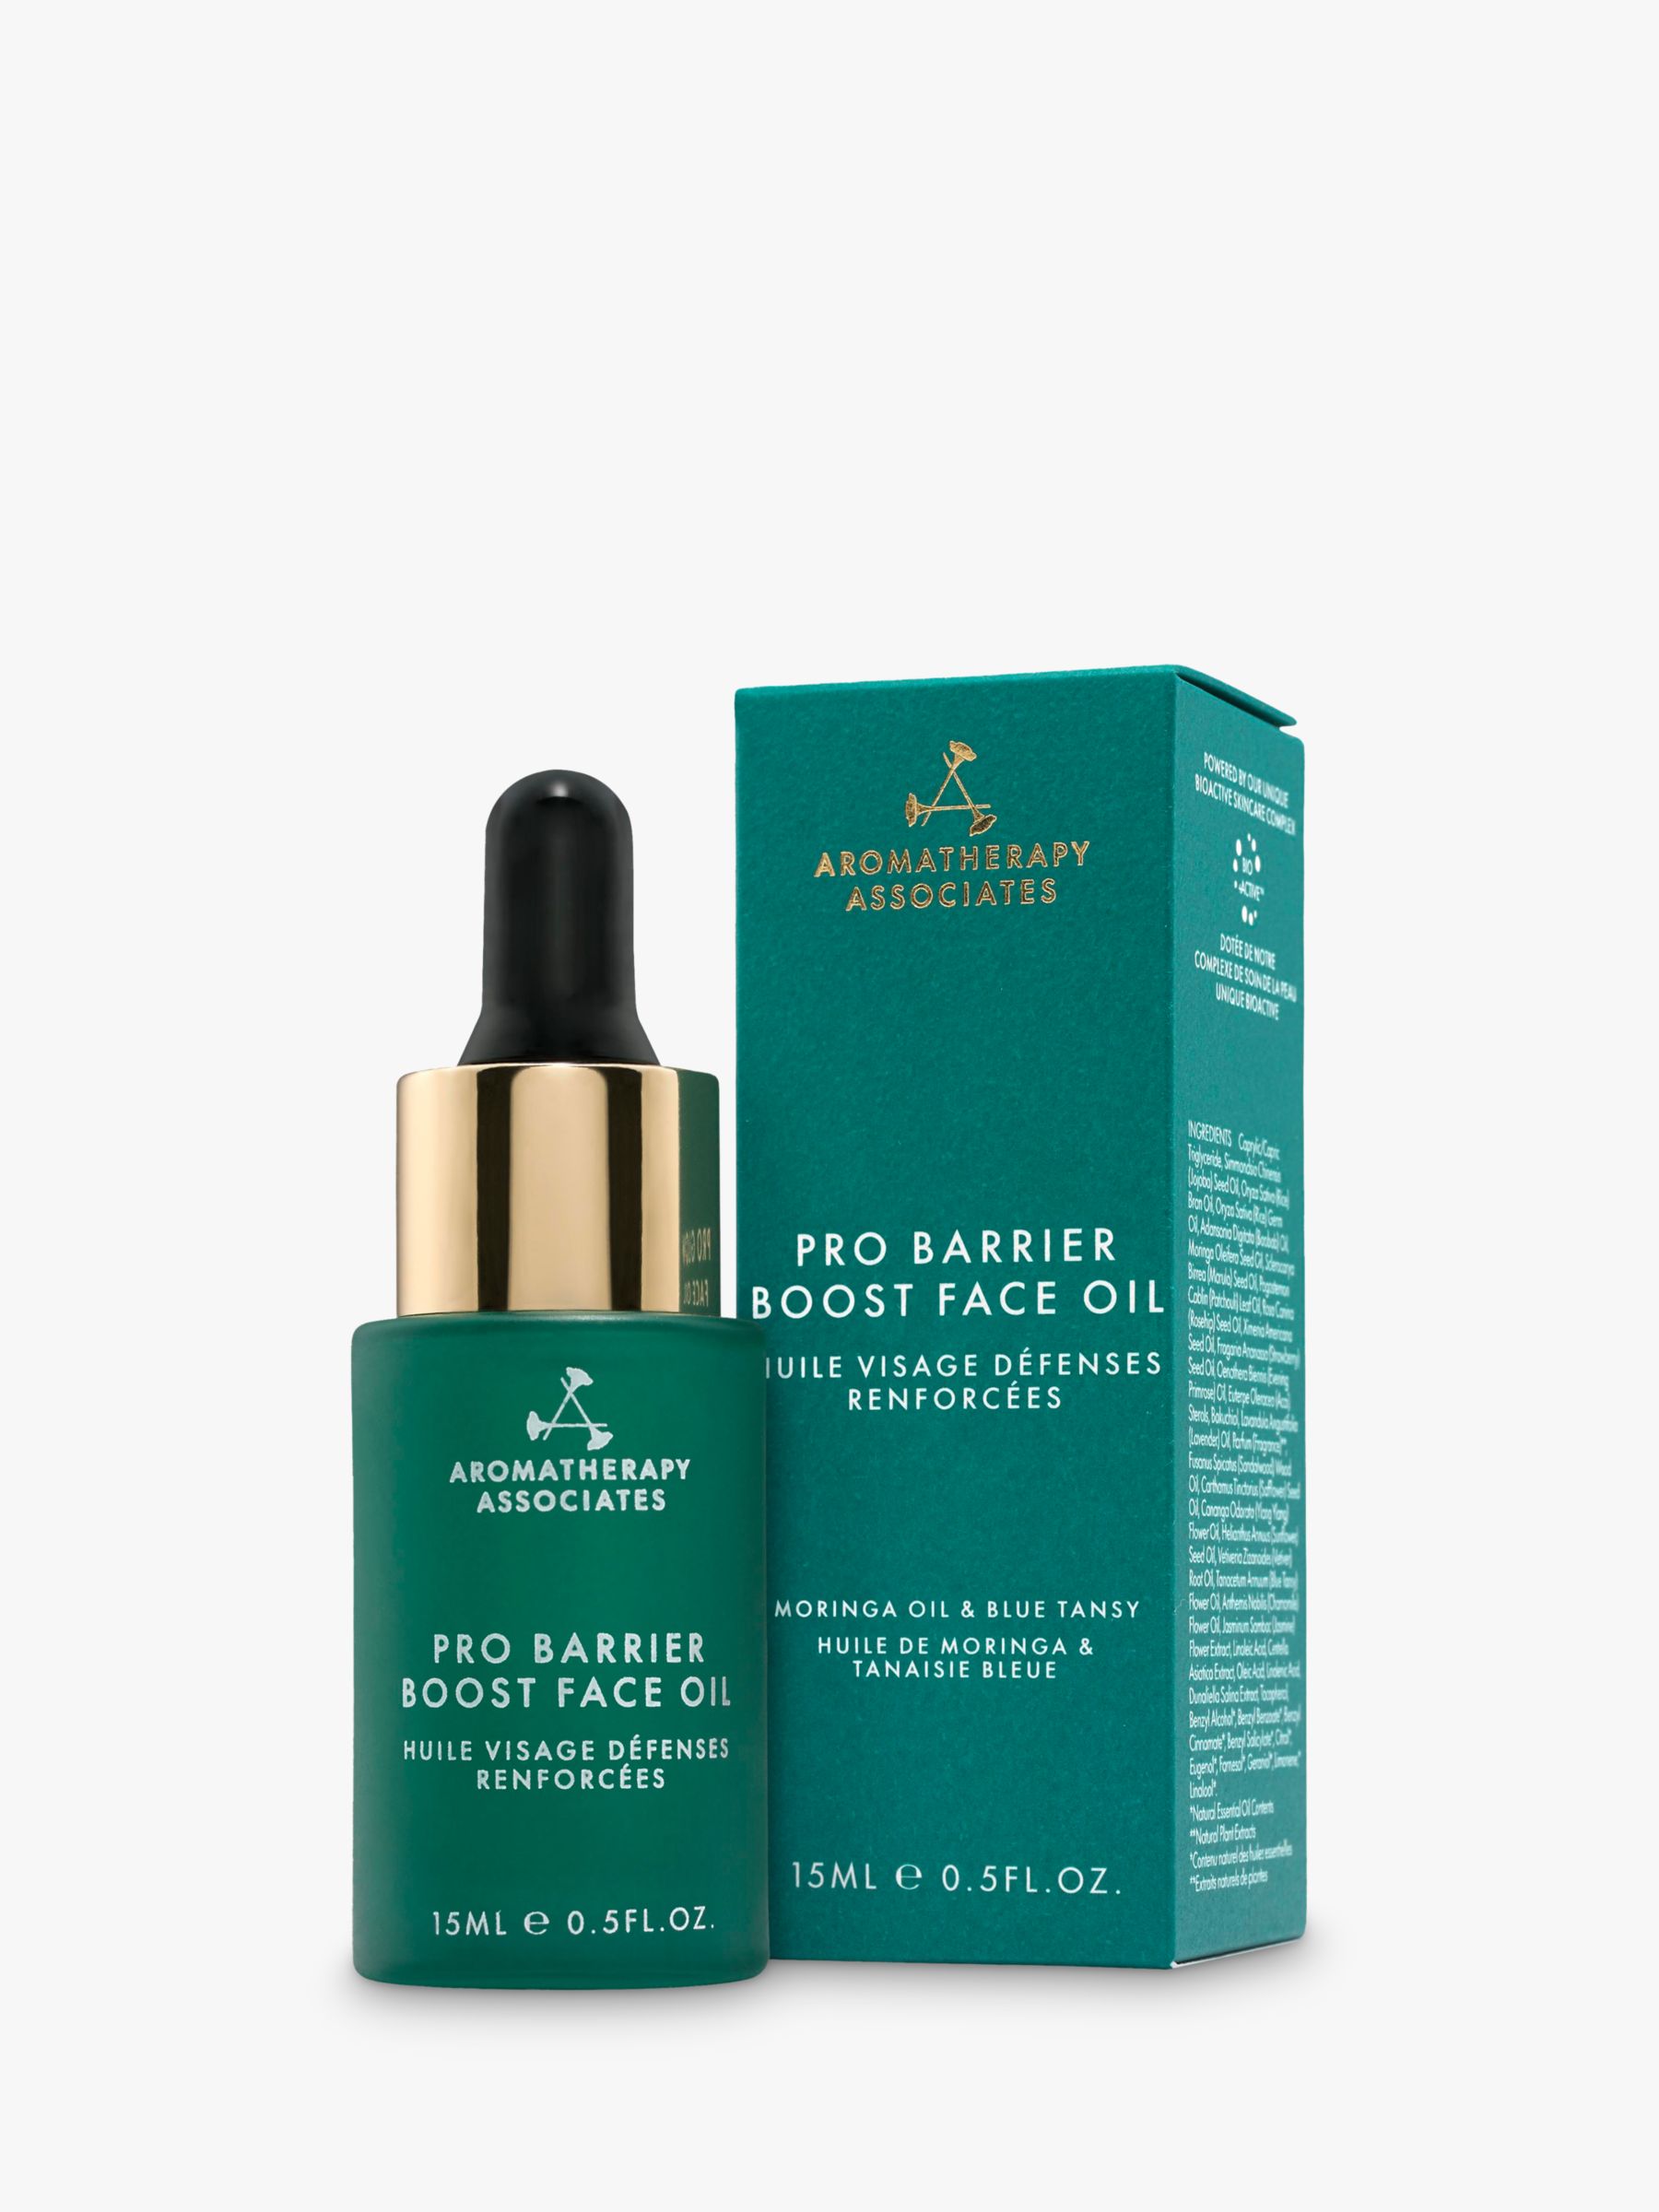 Aromatherapy Associates Pro Barrier Boost Face Oil, 15ml 1